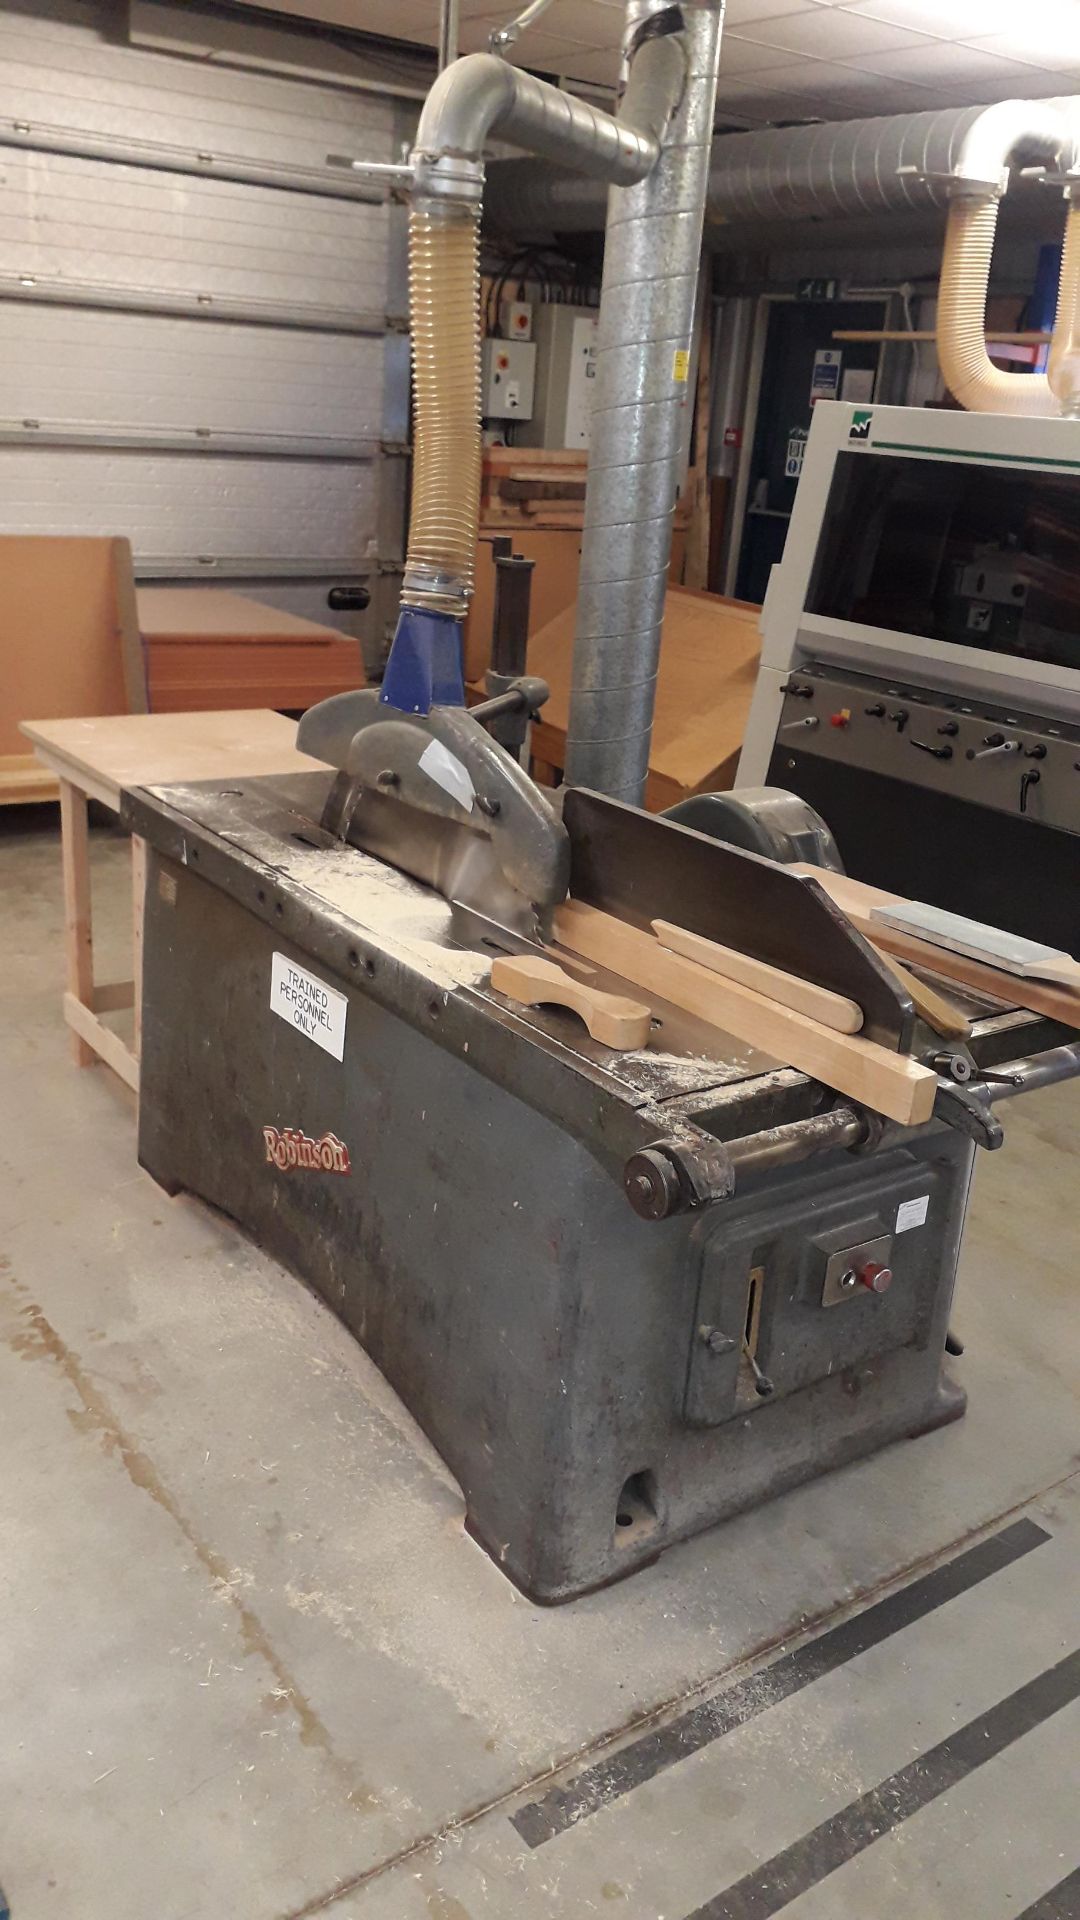 Robinson EB/T 32" Circular Table Saw, S/N 157 – To Be Disconnected by a Qualified Tradesperson